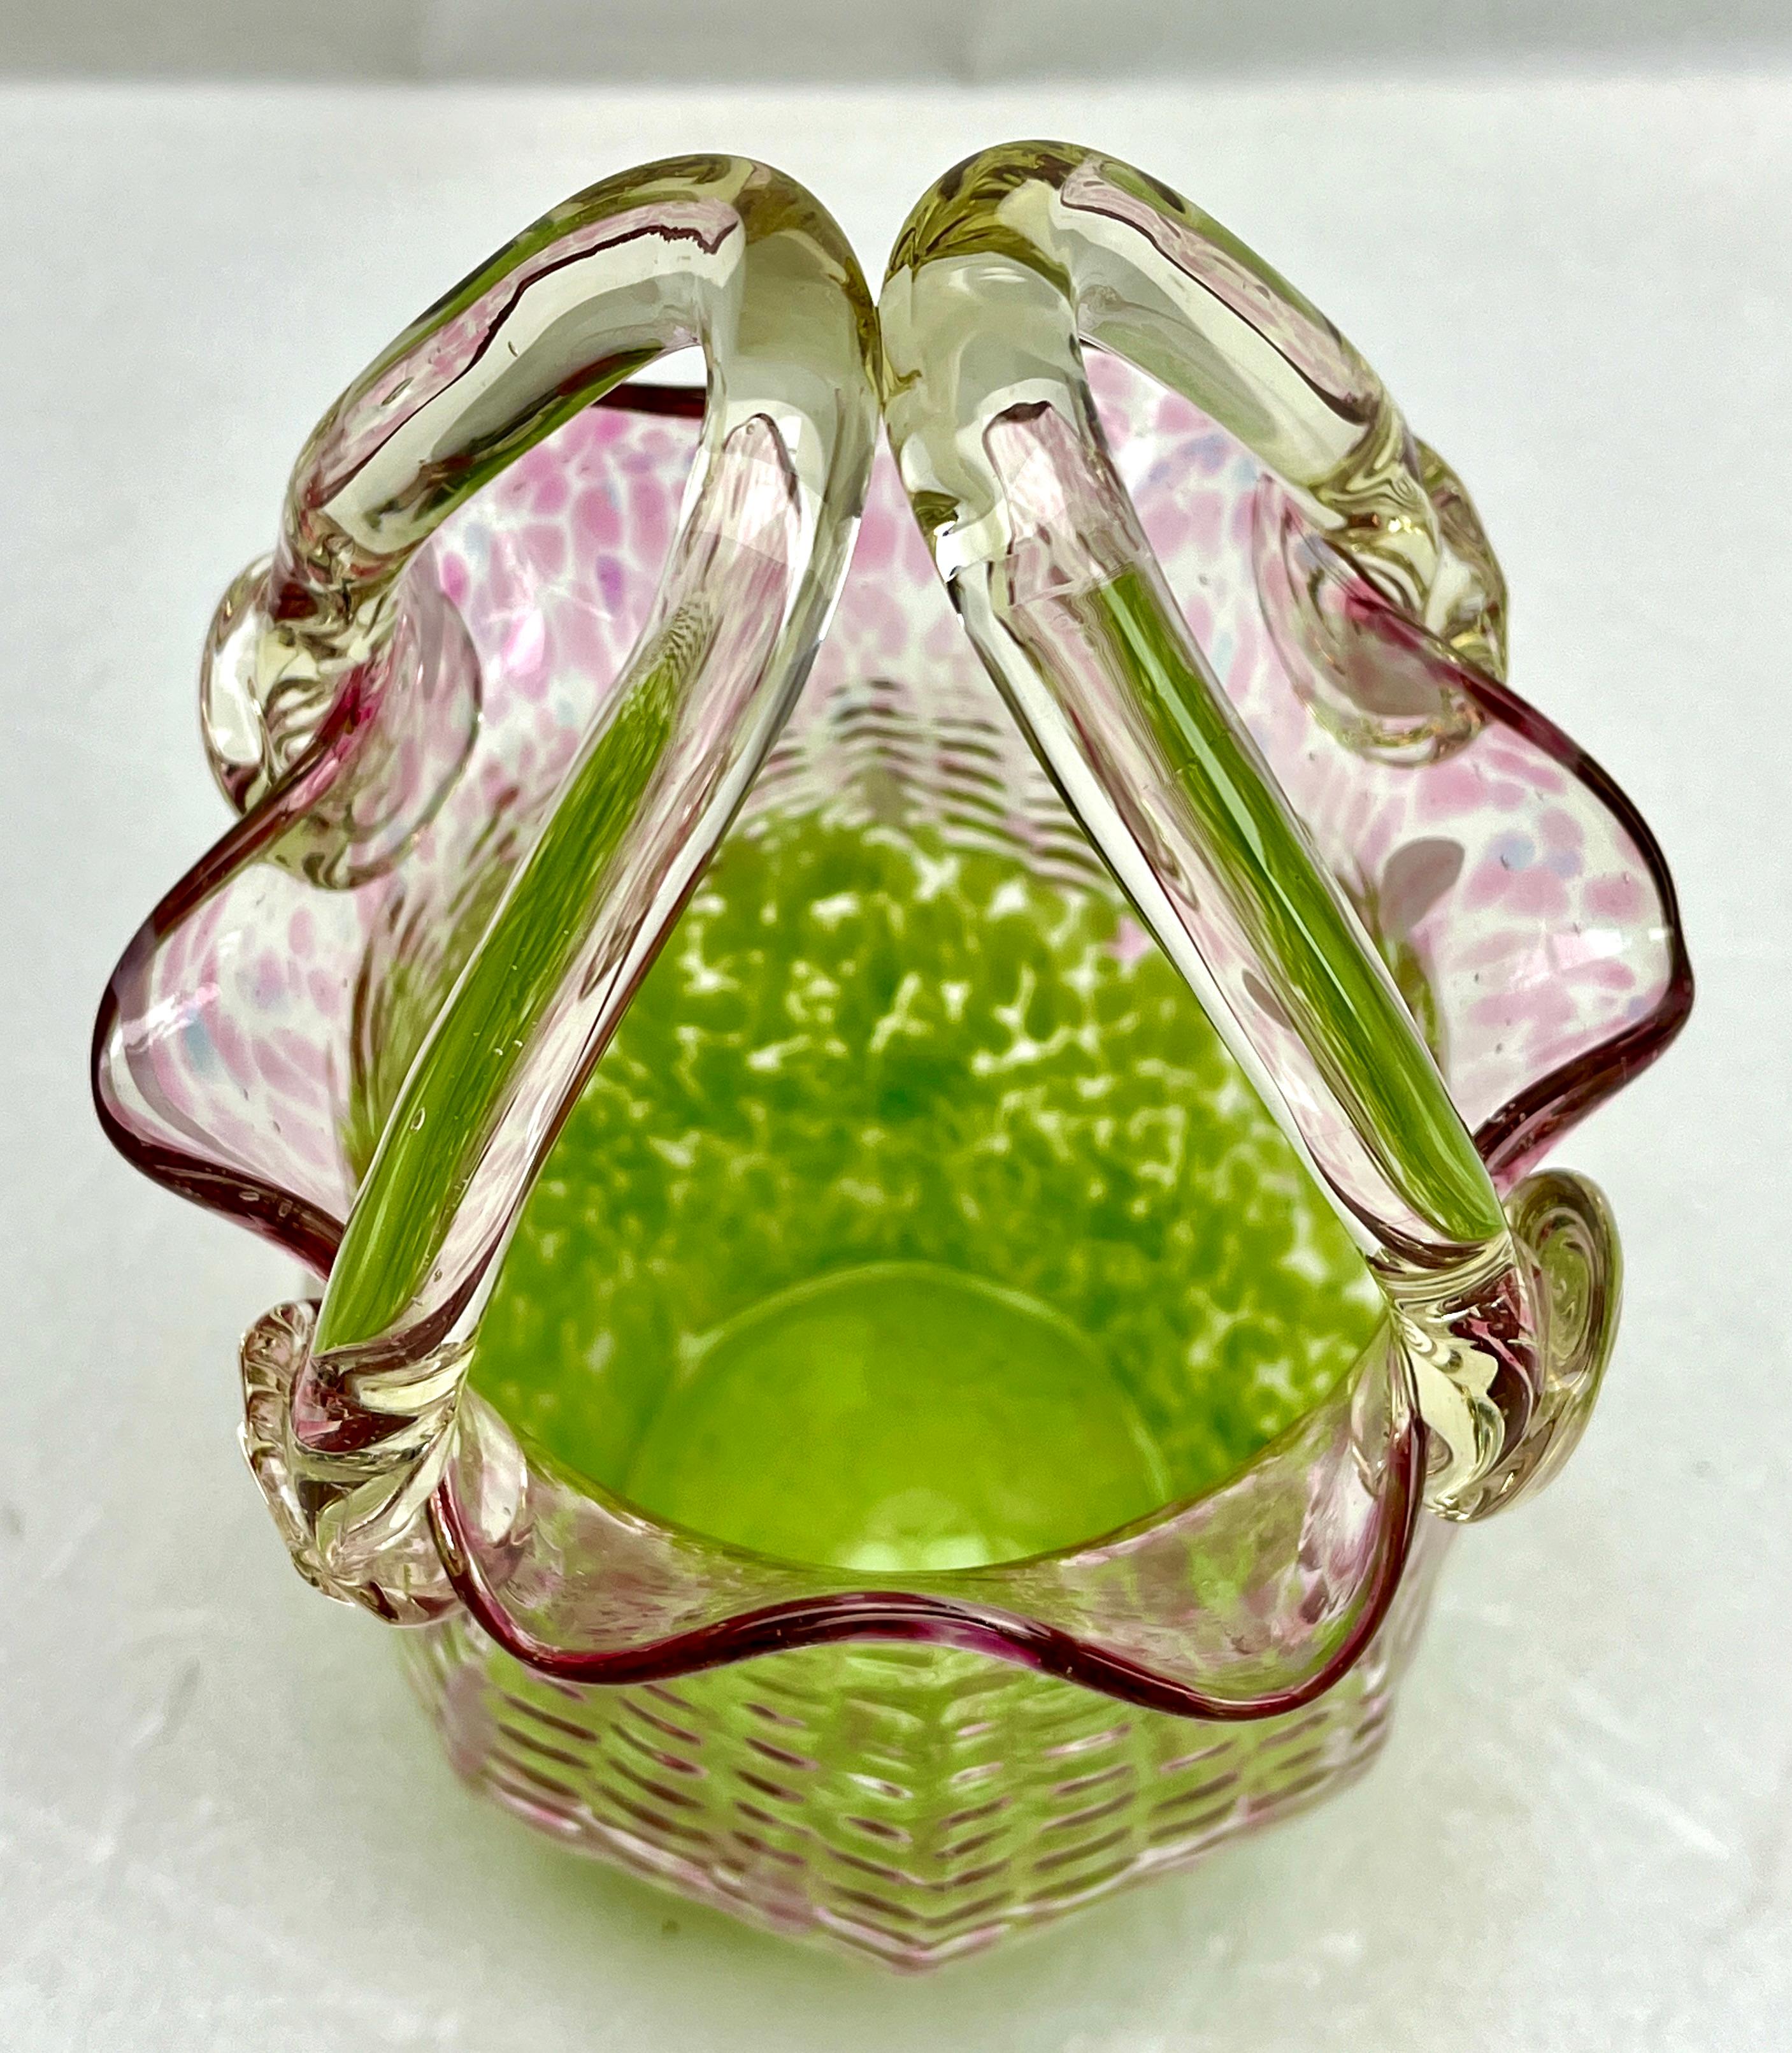 Hand-Crafted Loetz Art Nouveau Basket Whit Details of Irradiated Glass, 1930s For Sale